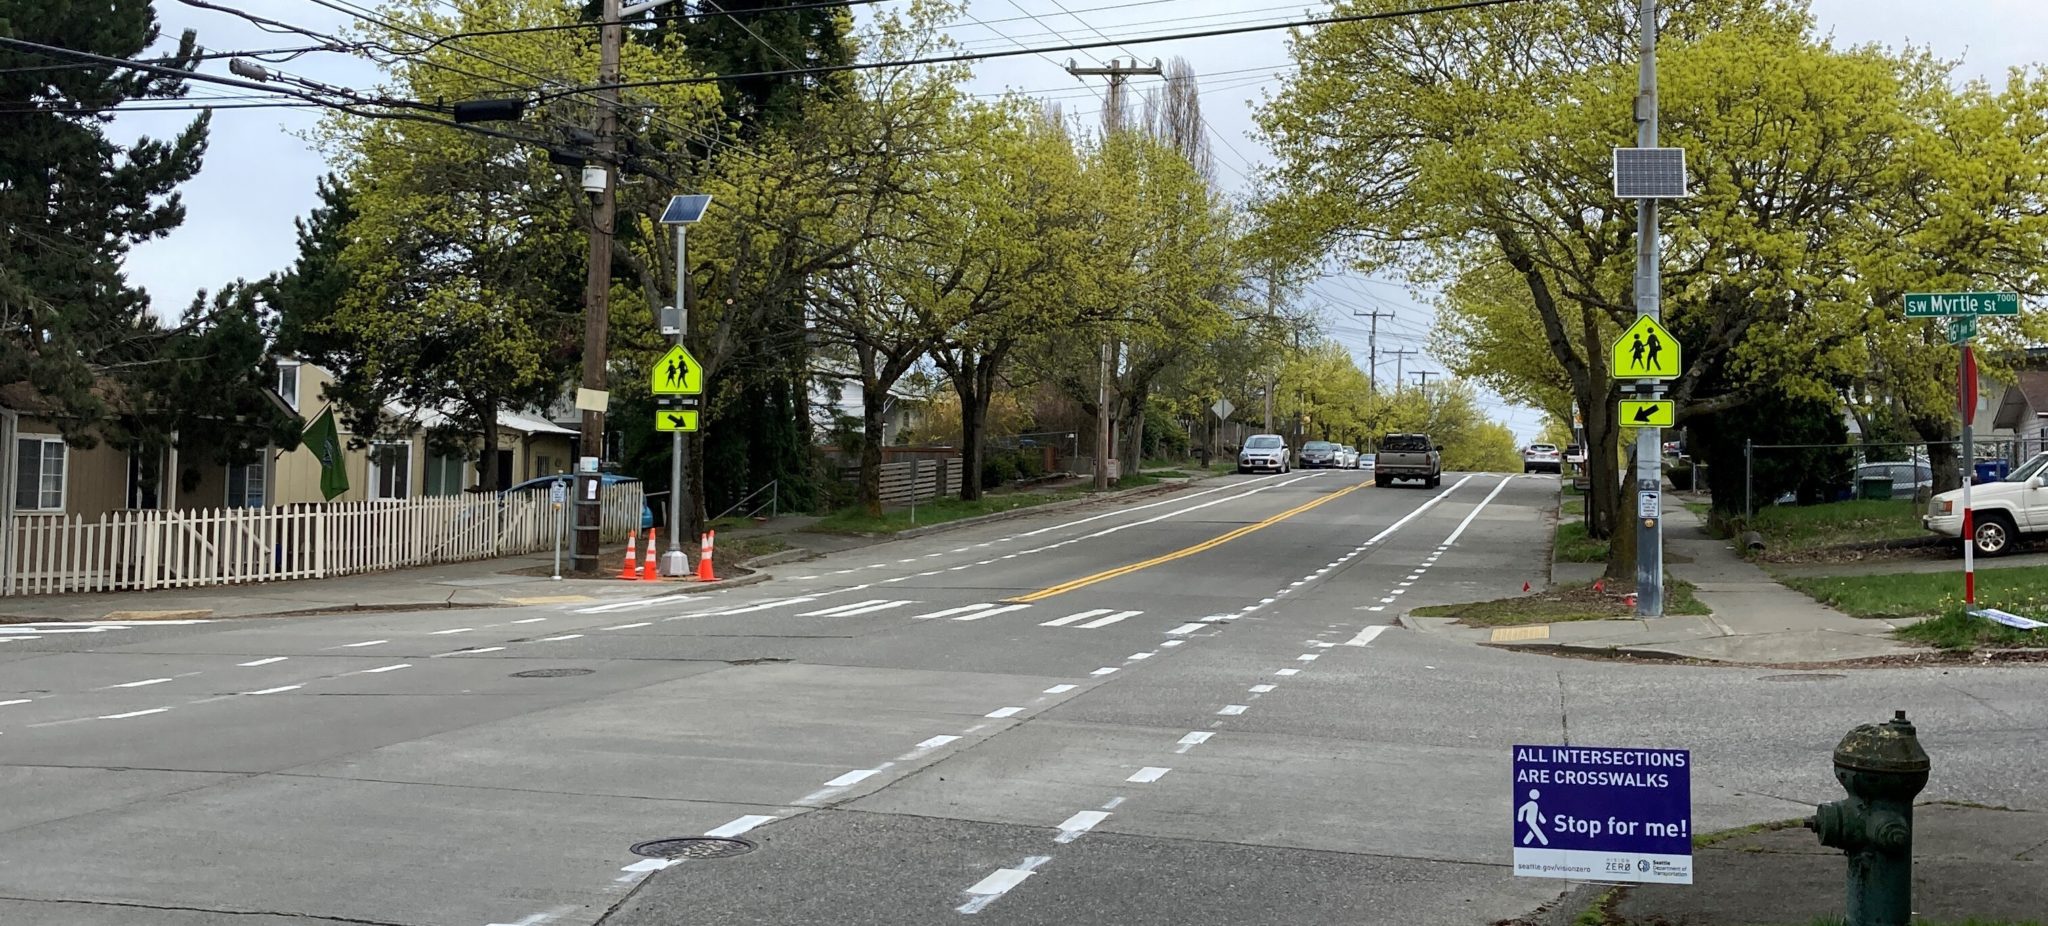 A new Rectangular Rapid Flashing Beacon (RRFB) located at 16th Ave SW and SW Myrtle St.